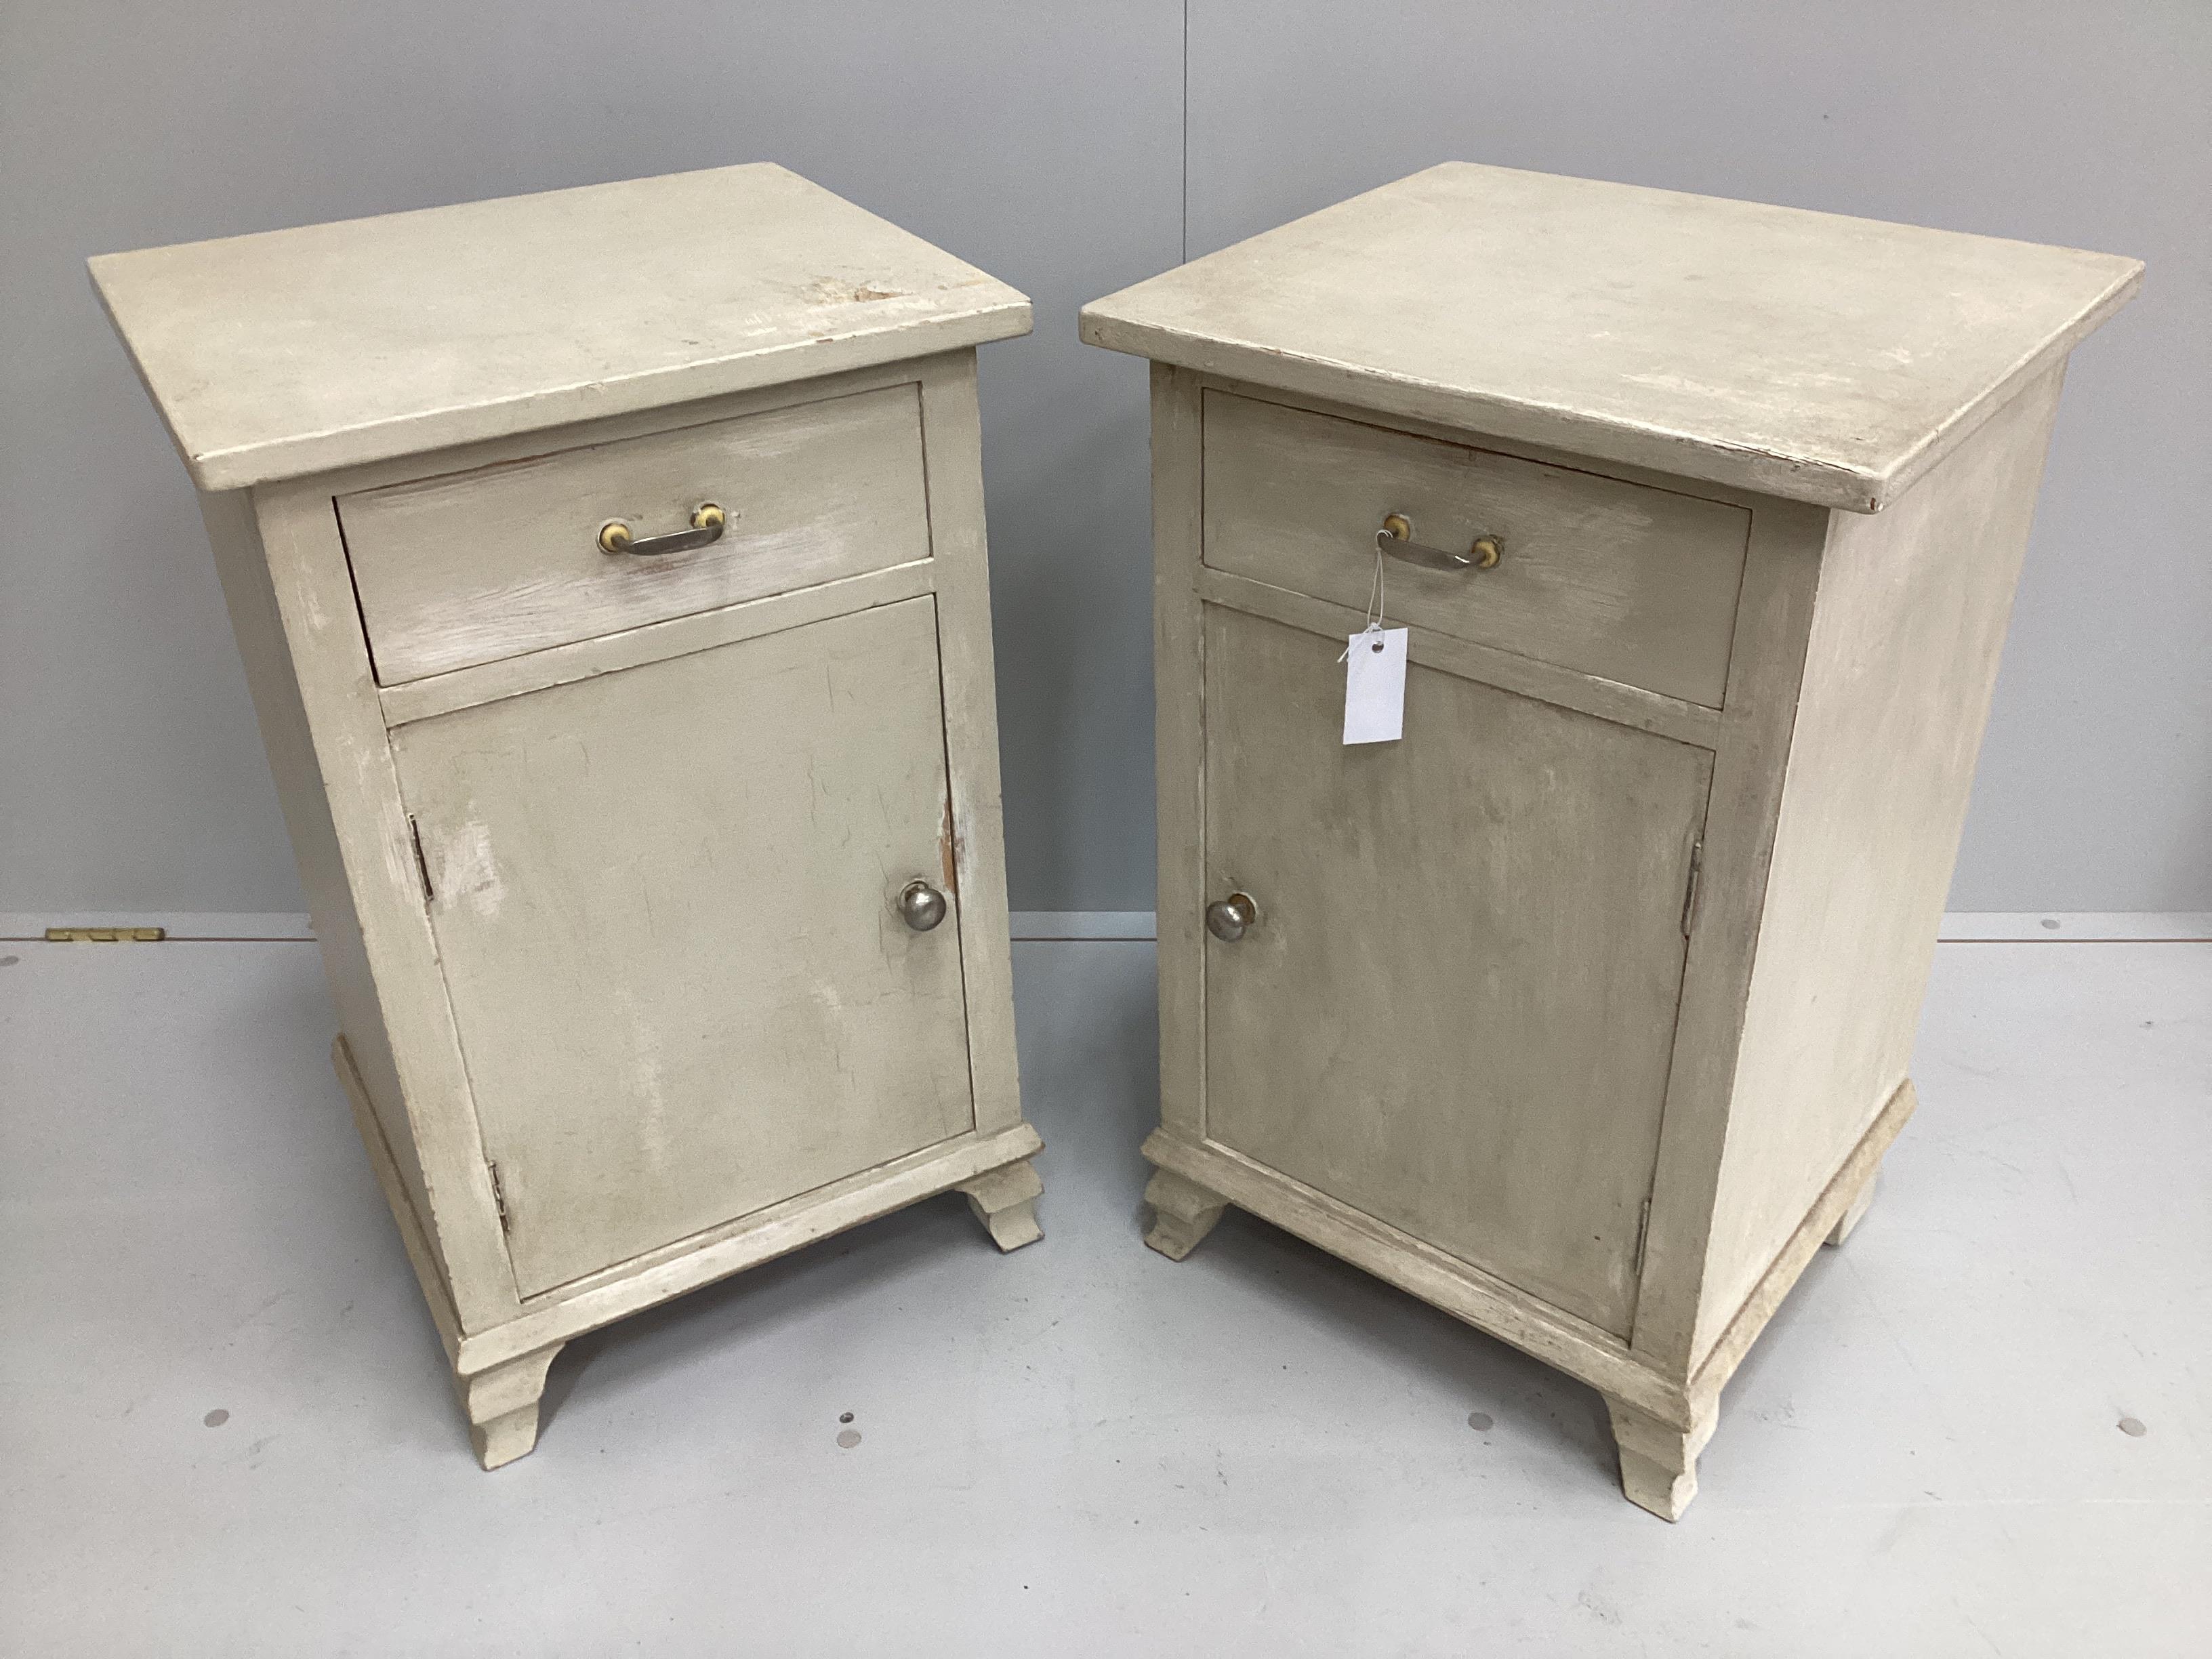 A pair of painted pine bedside cabinets, width 46cm, depth 40cm, height 72cm